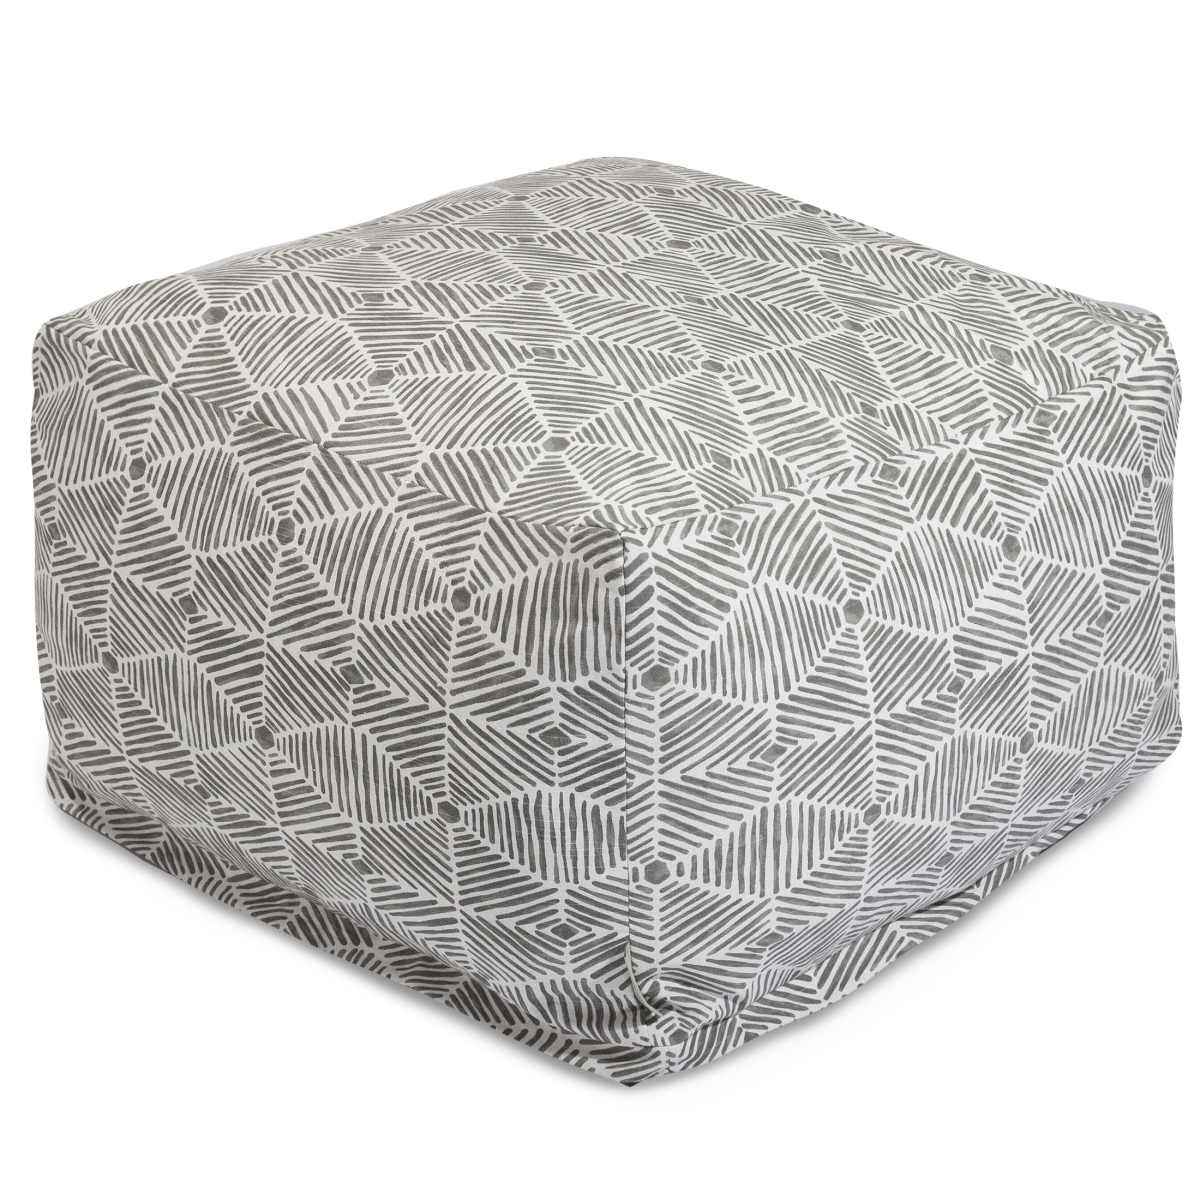 Picture of Majestic Home 85907237061 Charlie Gray Ottoman - 27 x 27 x 17 in.